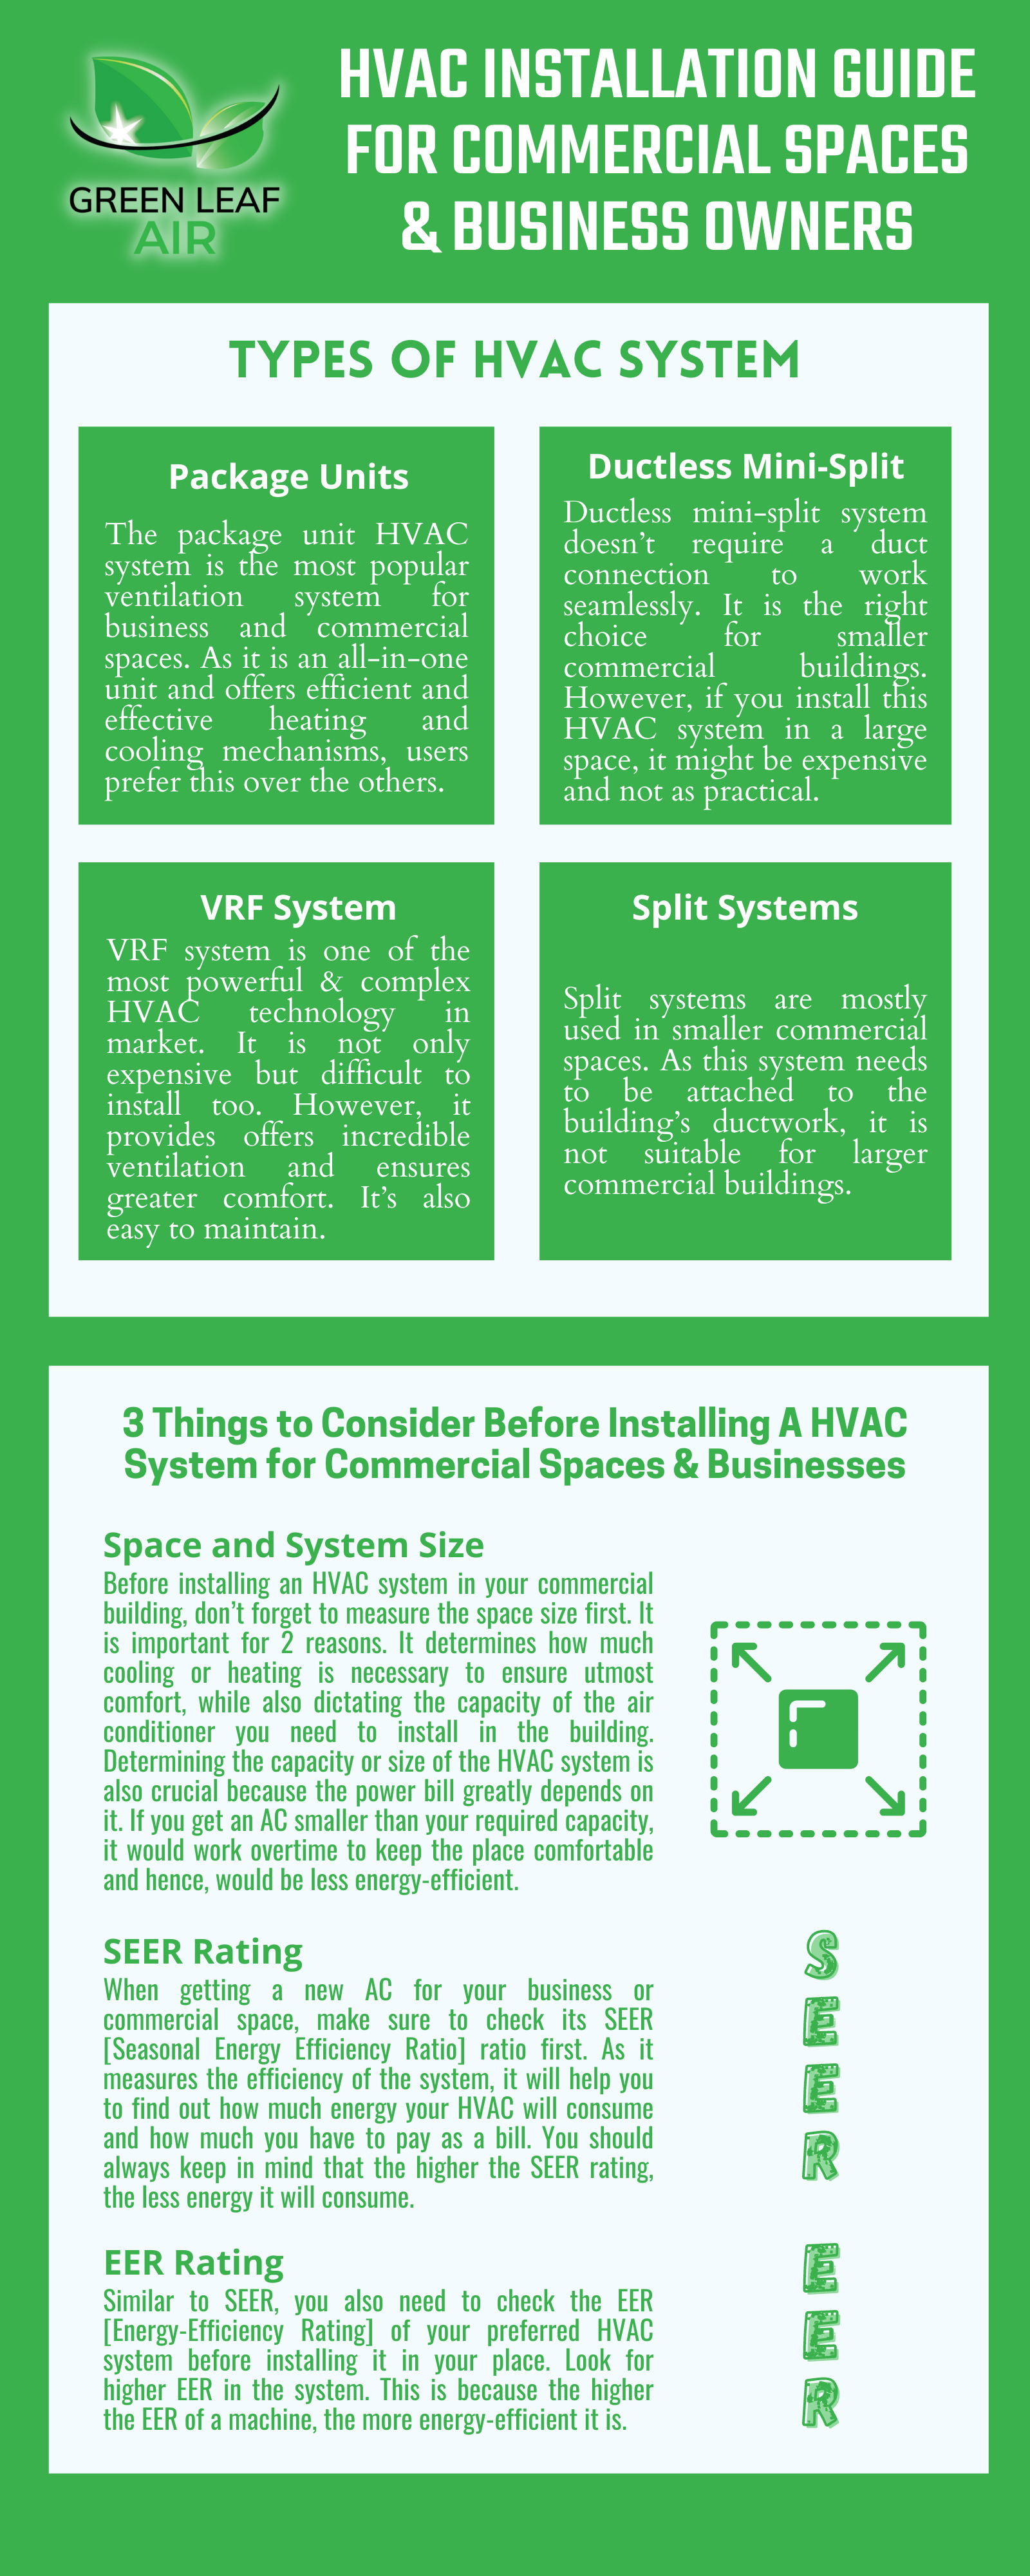 HVAC Installation Guide for Commercial Spaces & Business Owners